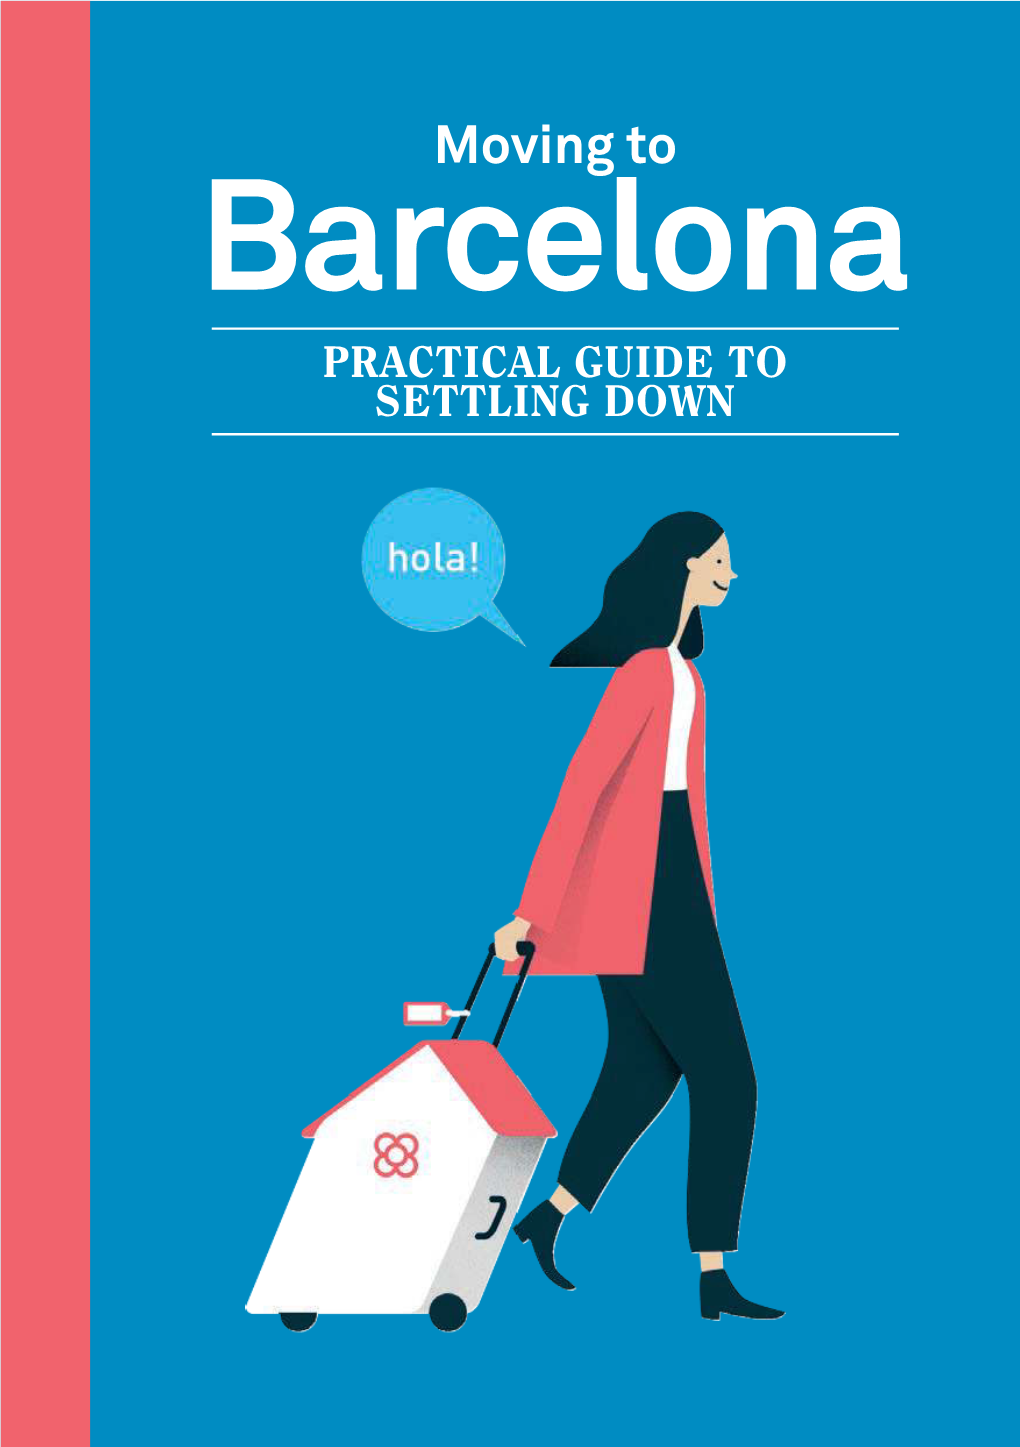 Barcelona PRACTICAL GUIDE to SETTLING DOWN